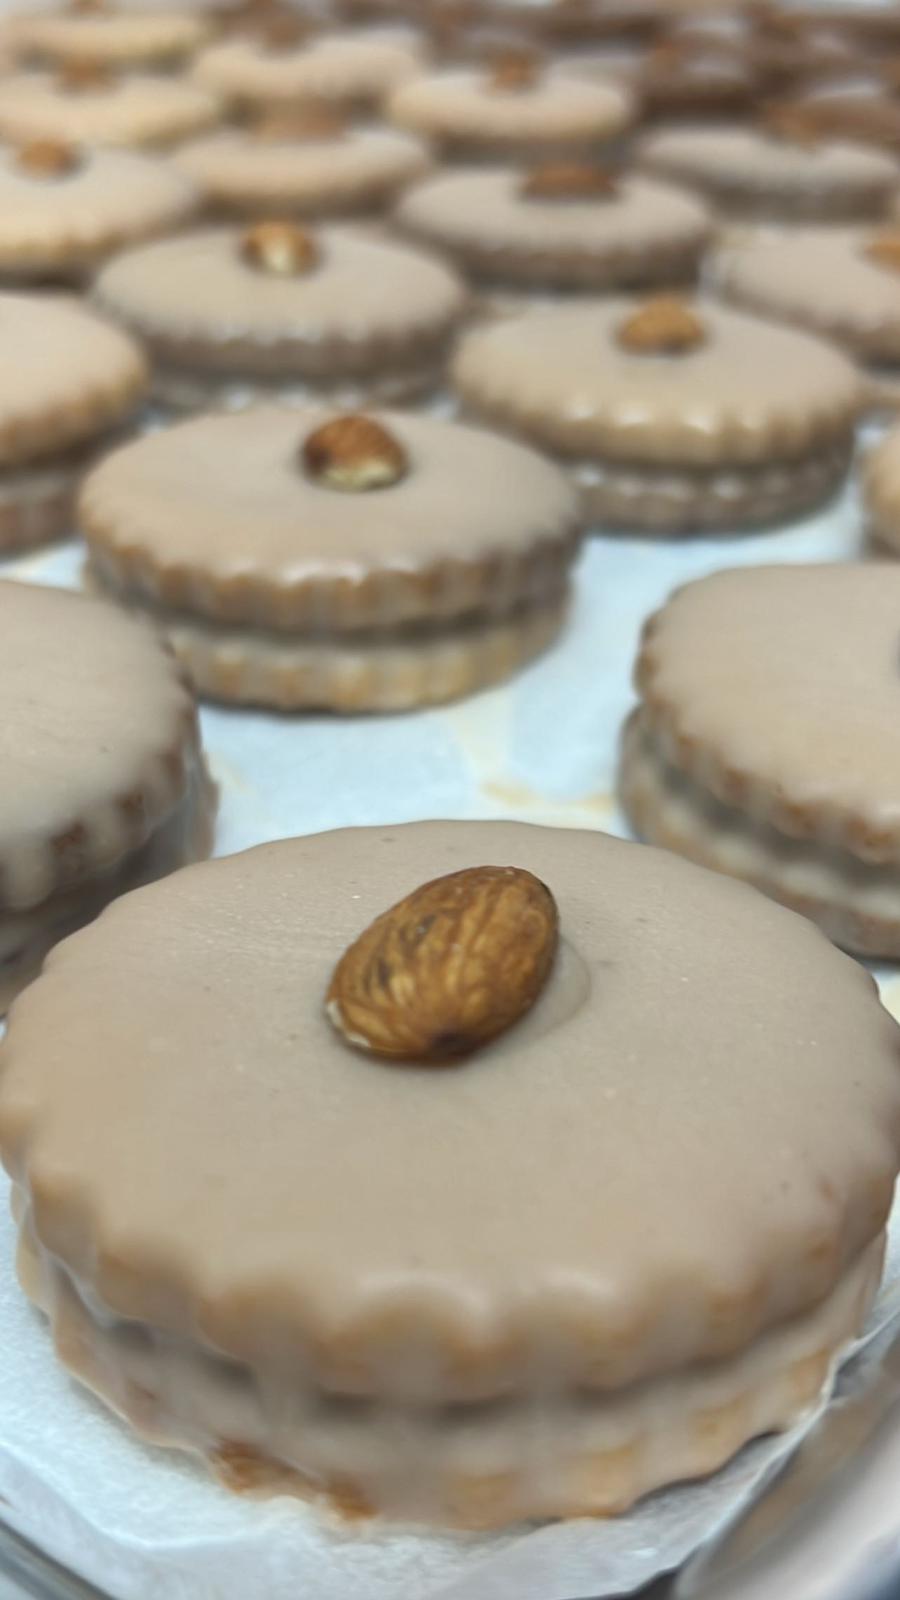 Mocha covered almond cookies Passover